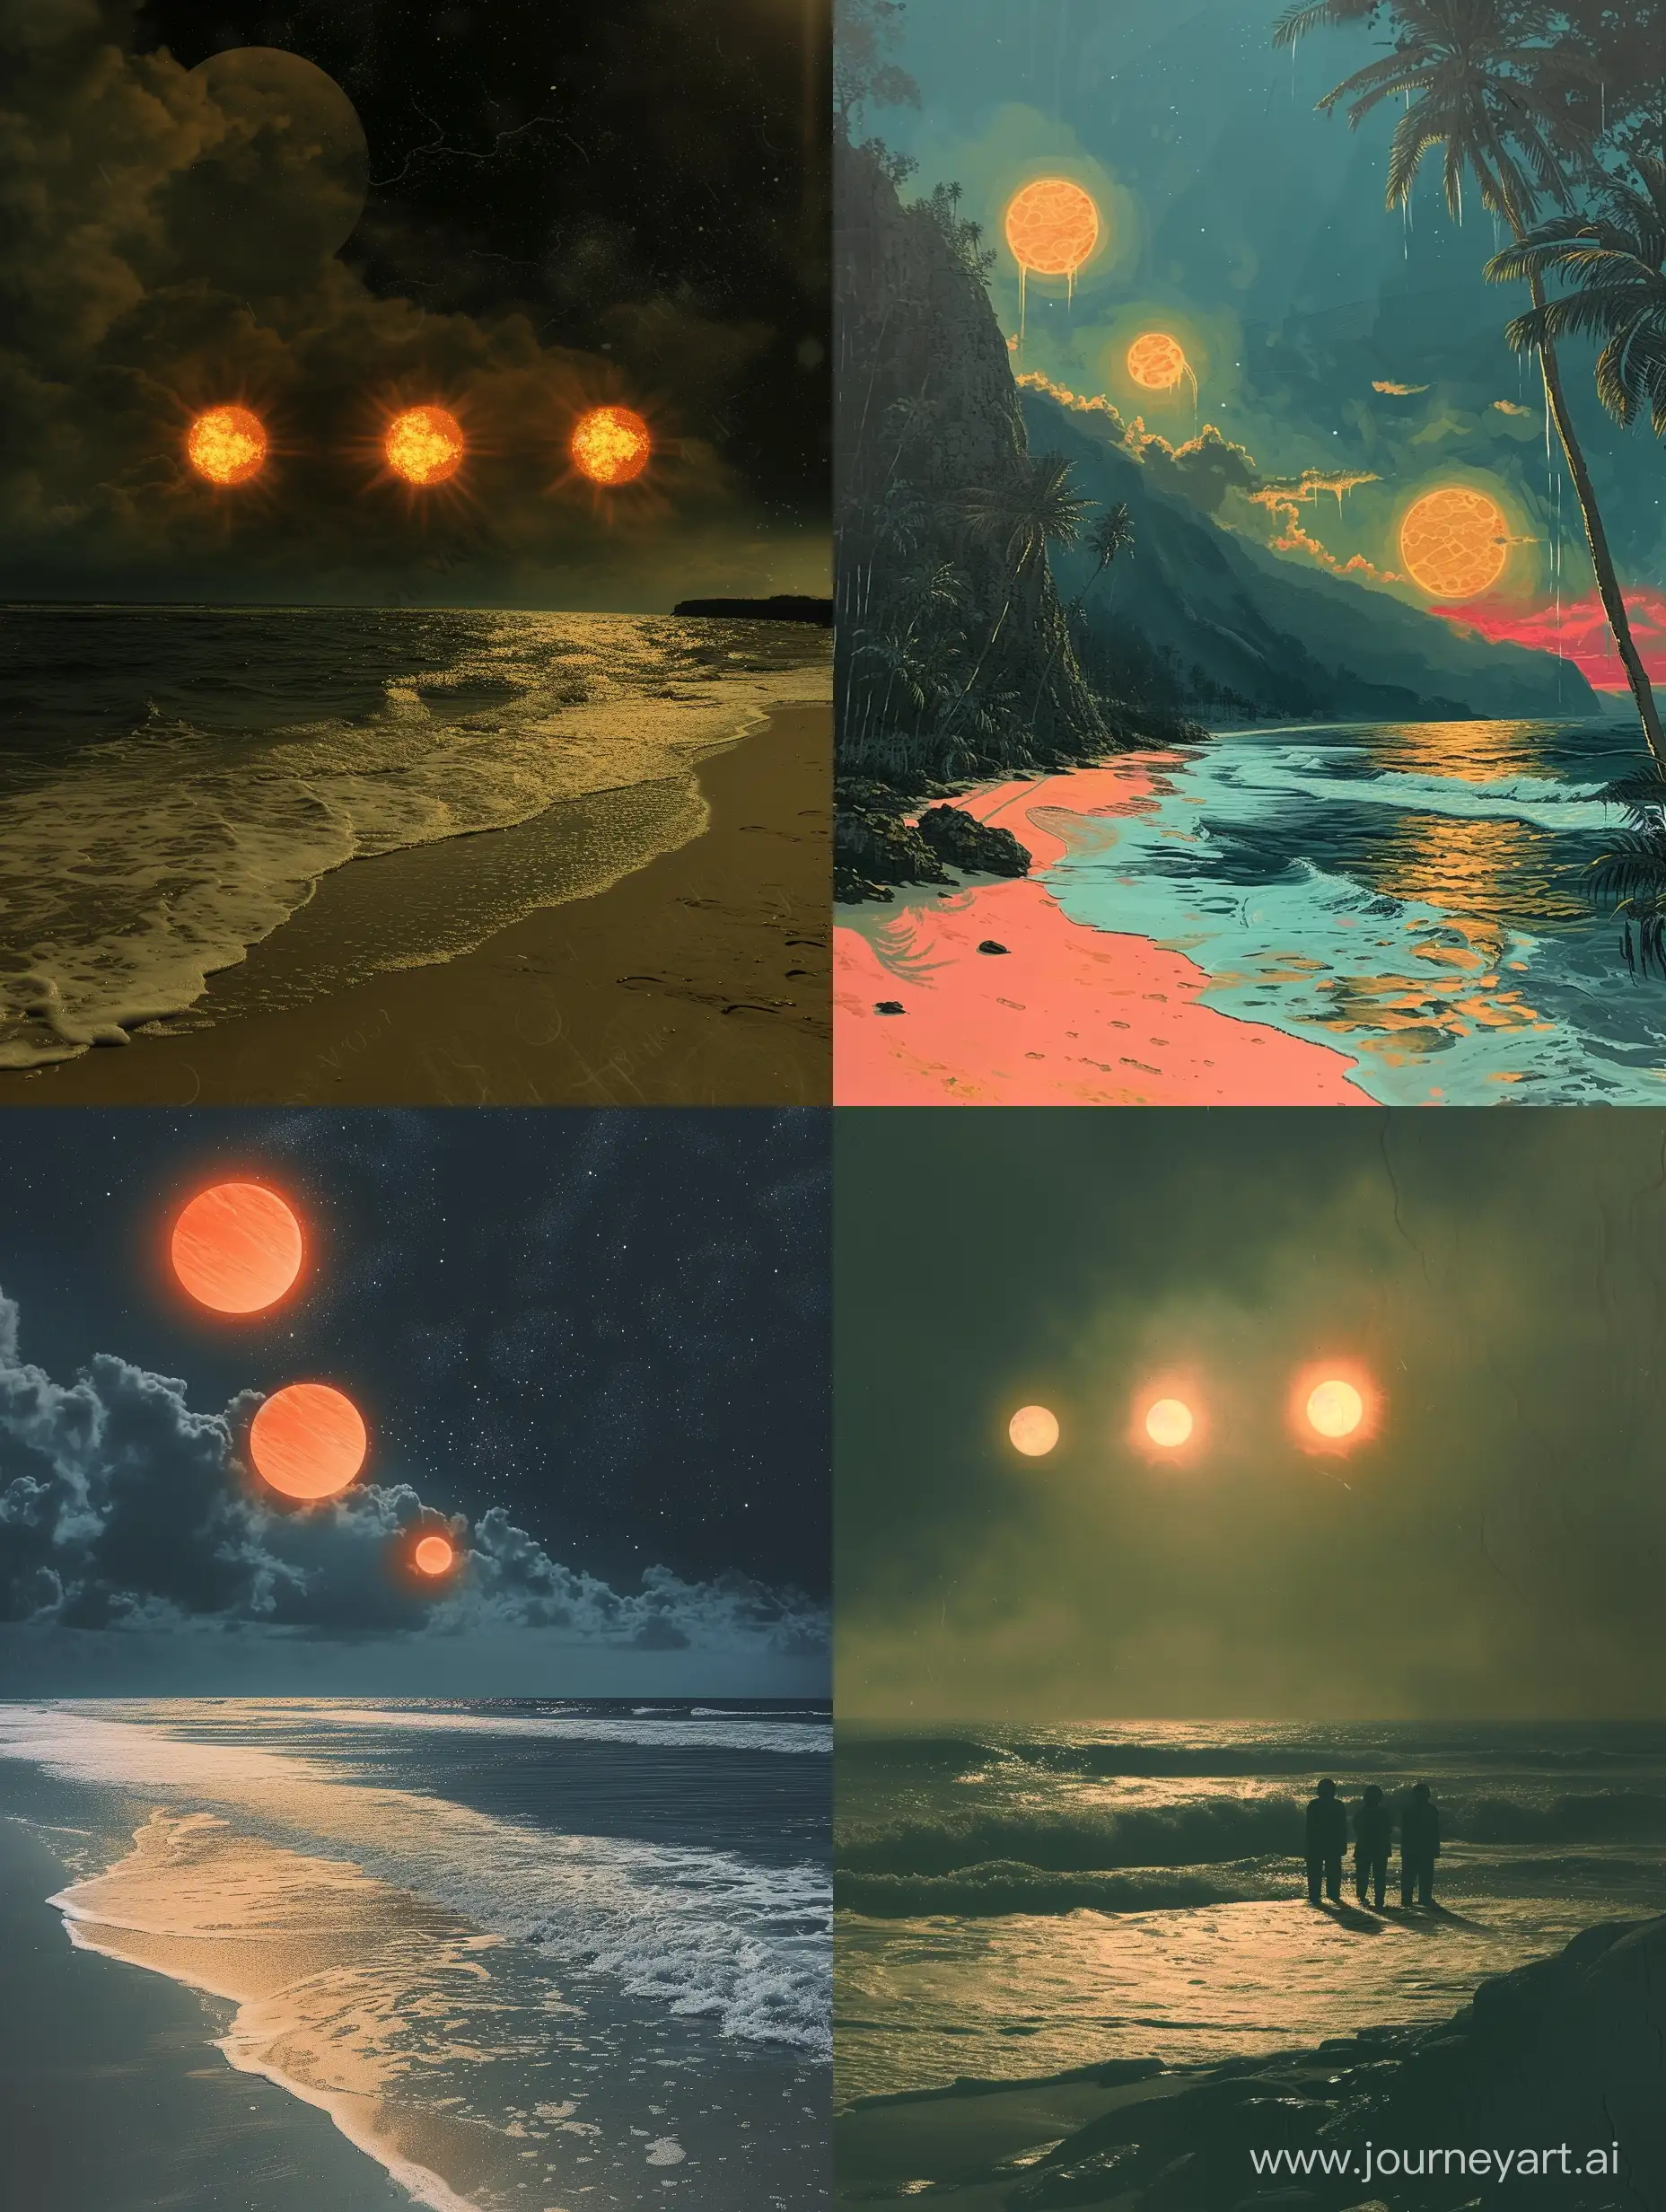 Extraterrestrial-Serenity-Alien-Beach-Bathed-in-Triple-Suns